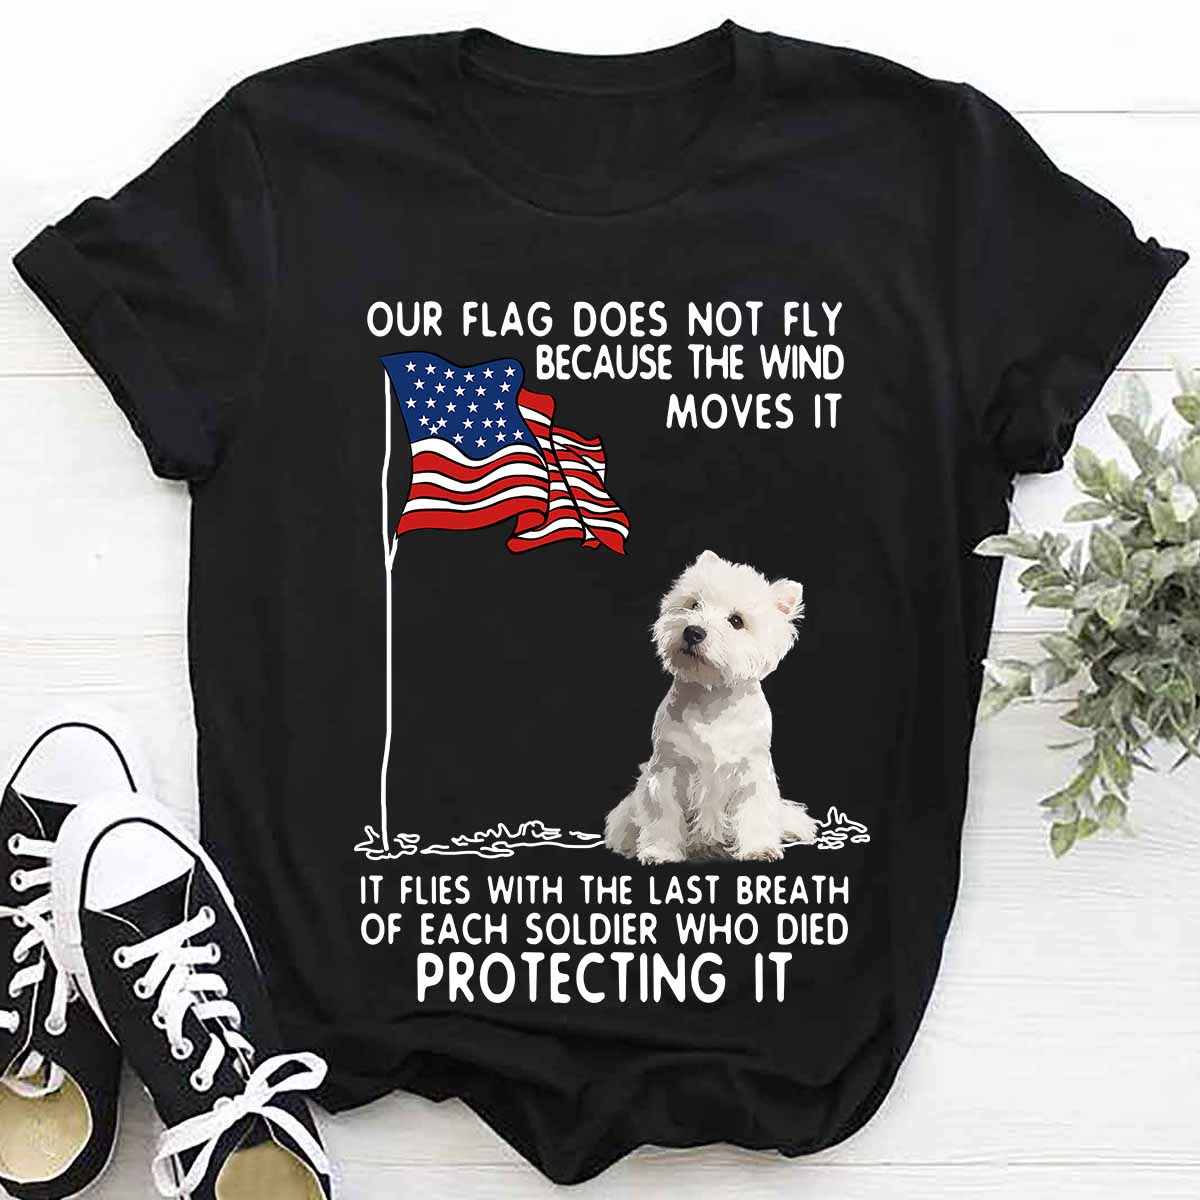 Our flag does not fly because the wind moves it - America flag, Shih Tzu dog